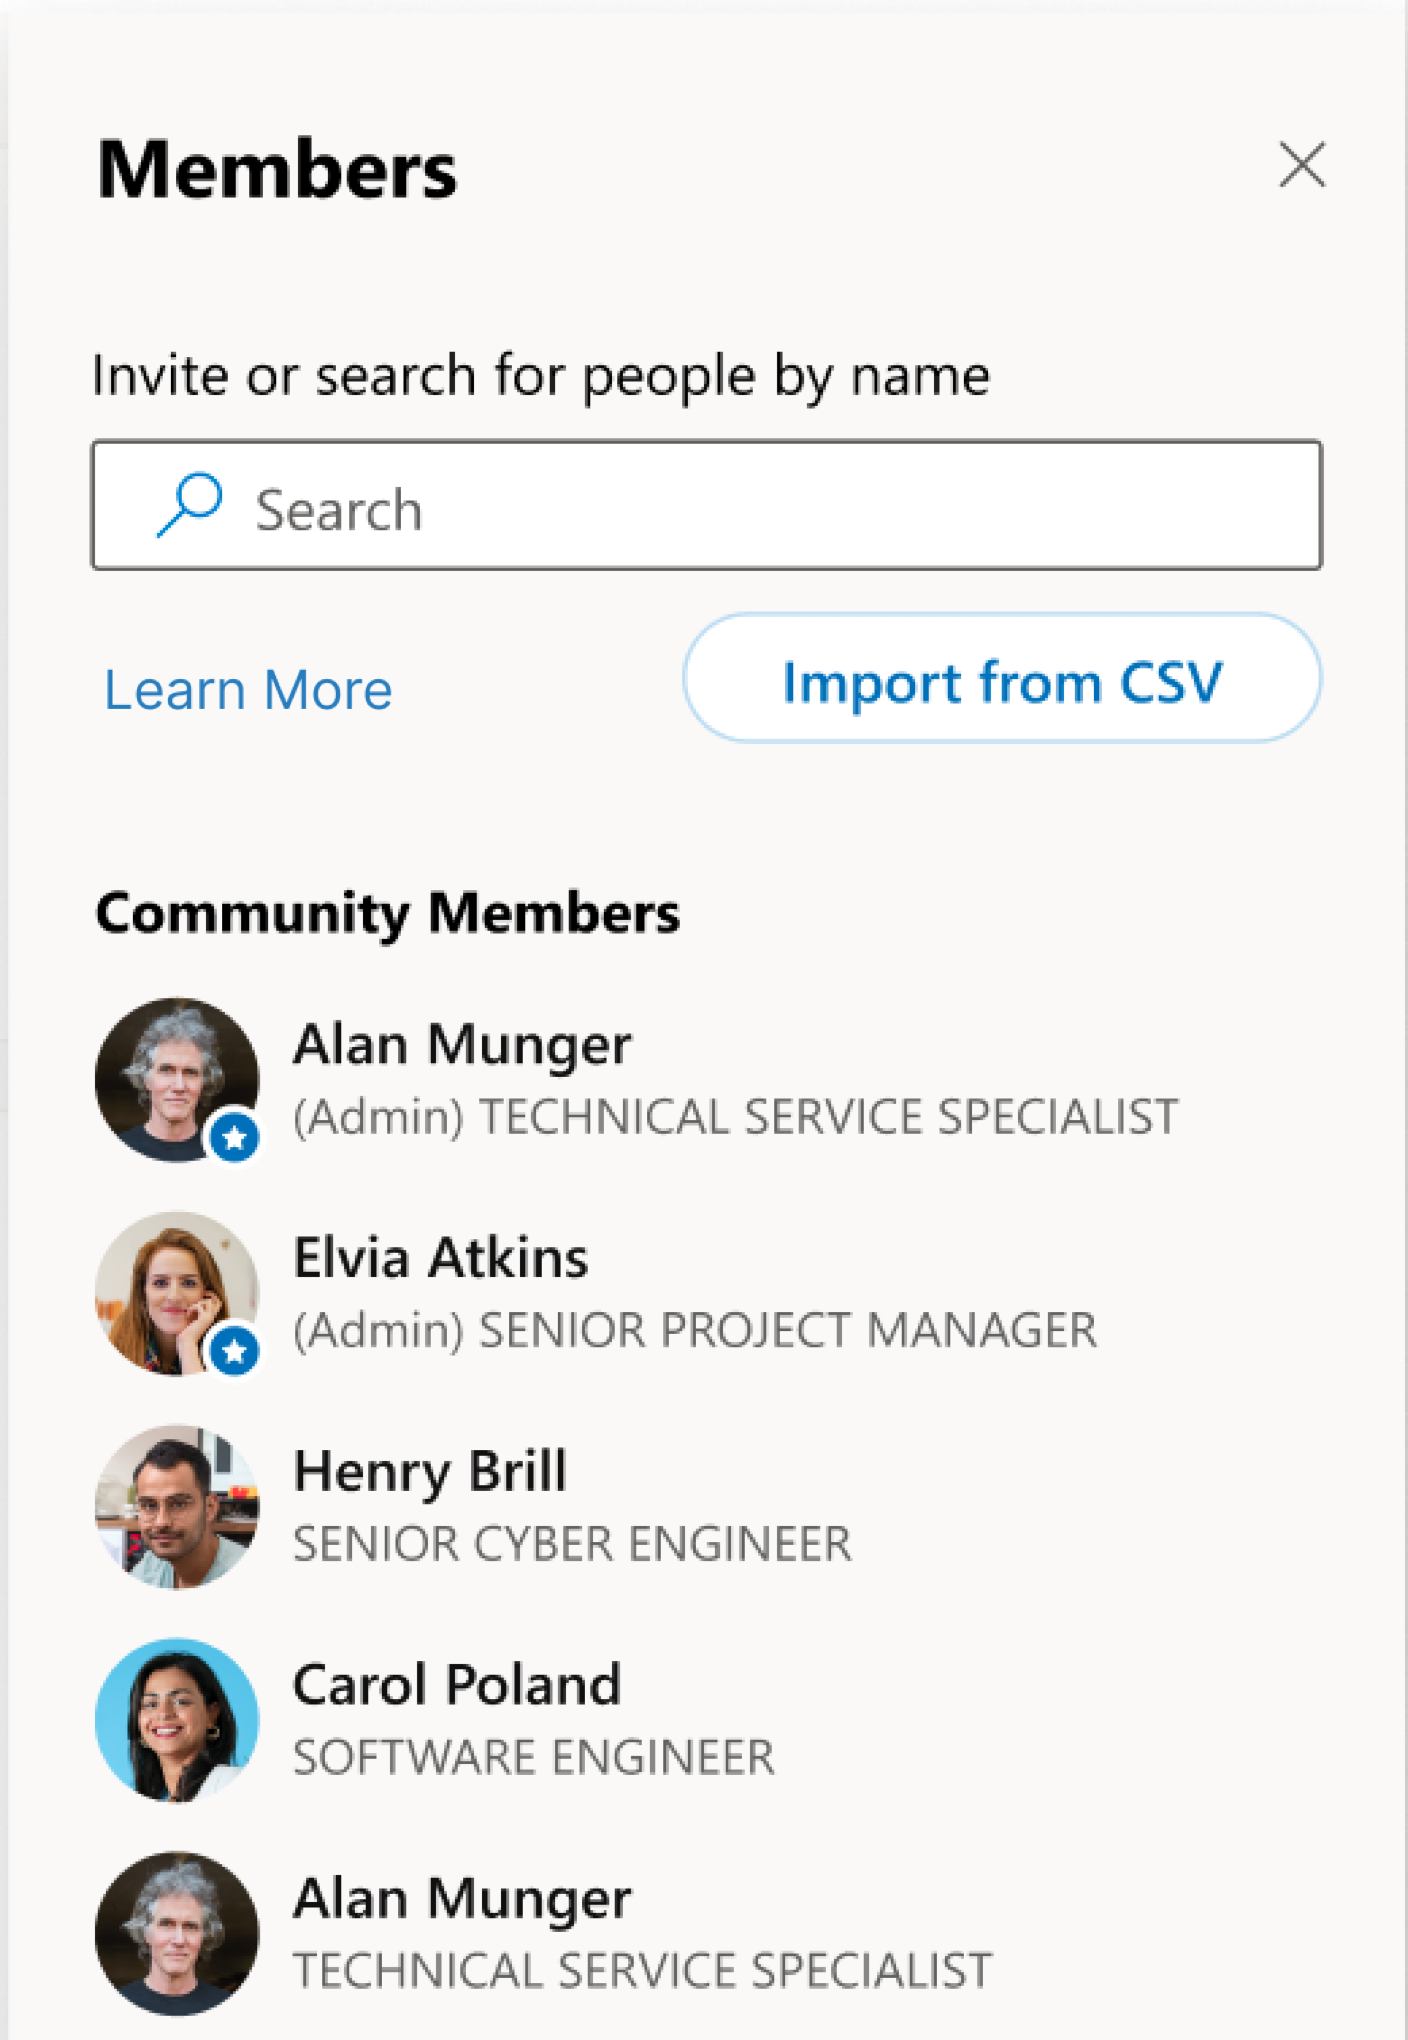 Find the Import CSV file option under Members in the right pane